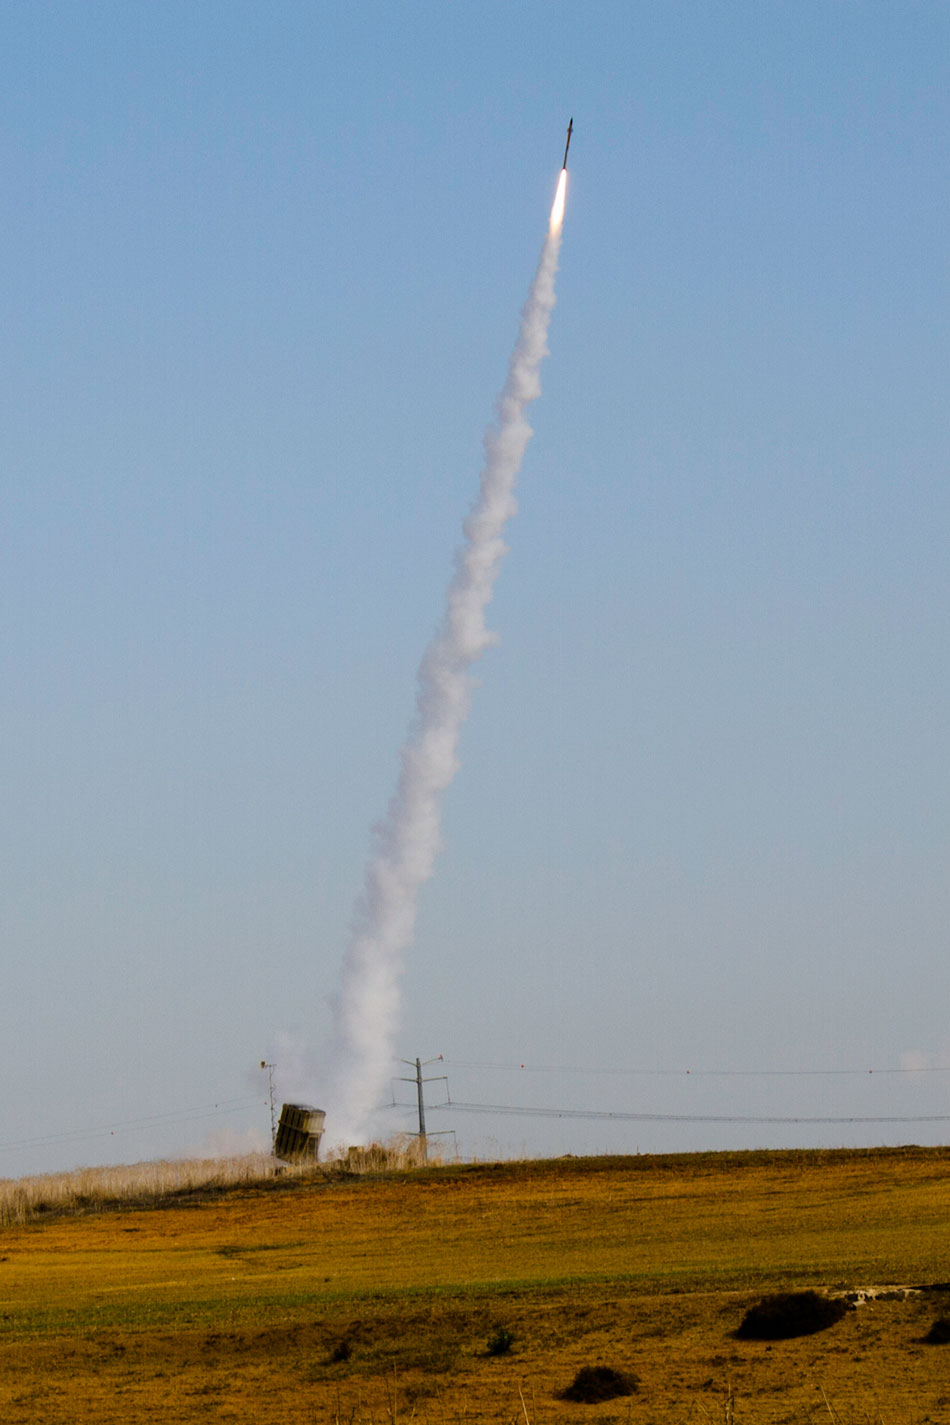 The Iron Dome counter-rocket system is launched on the outskirt of Ashdod city, southern Israel, to intercept rockets fired from Gaza by Hamas militants. (Xinhua/Yang Zhiwang)